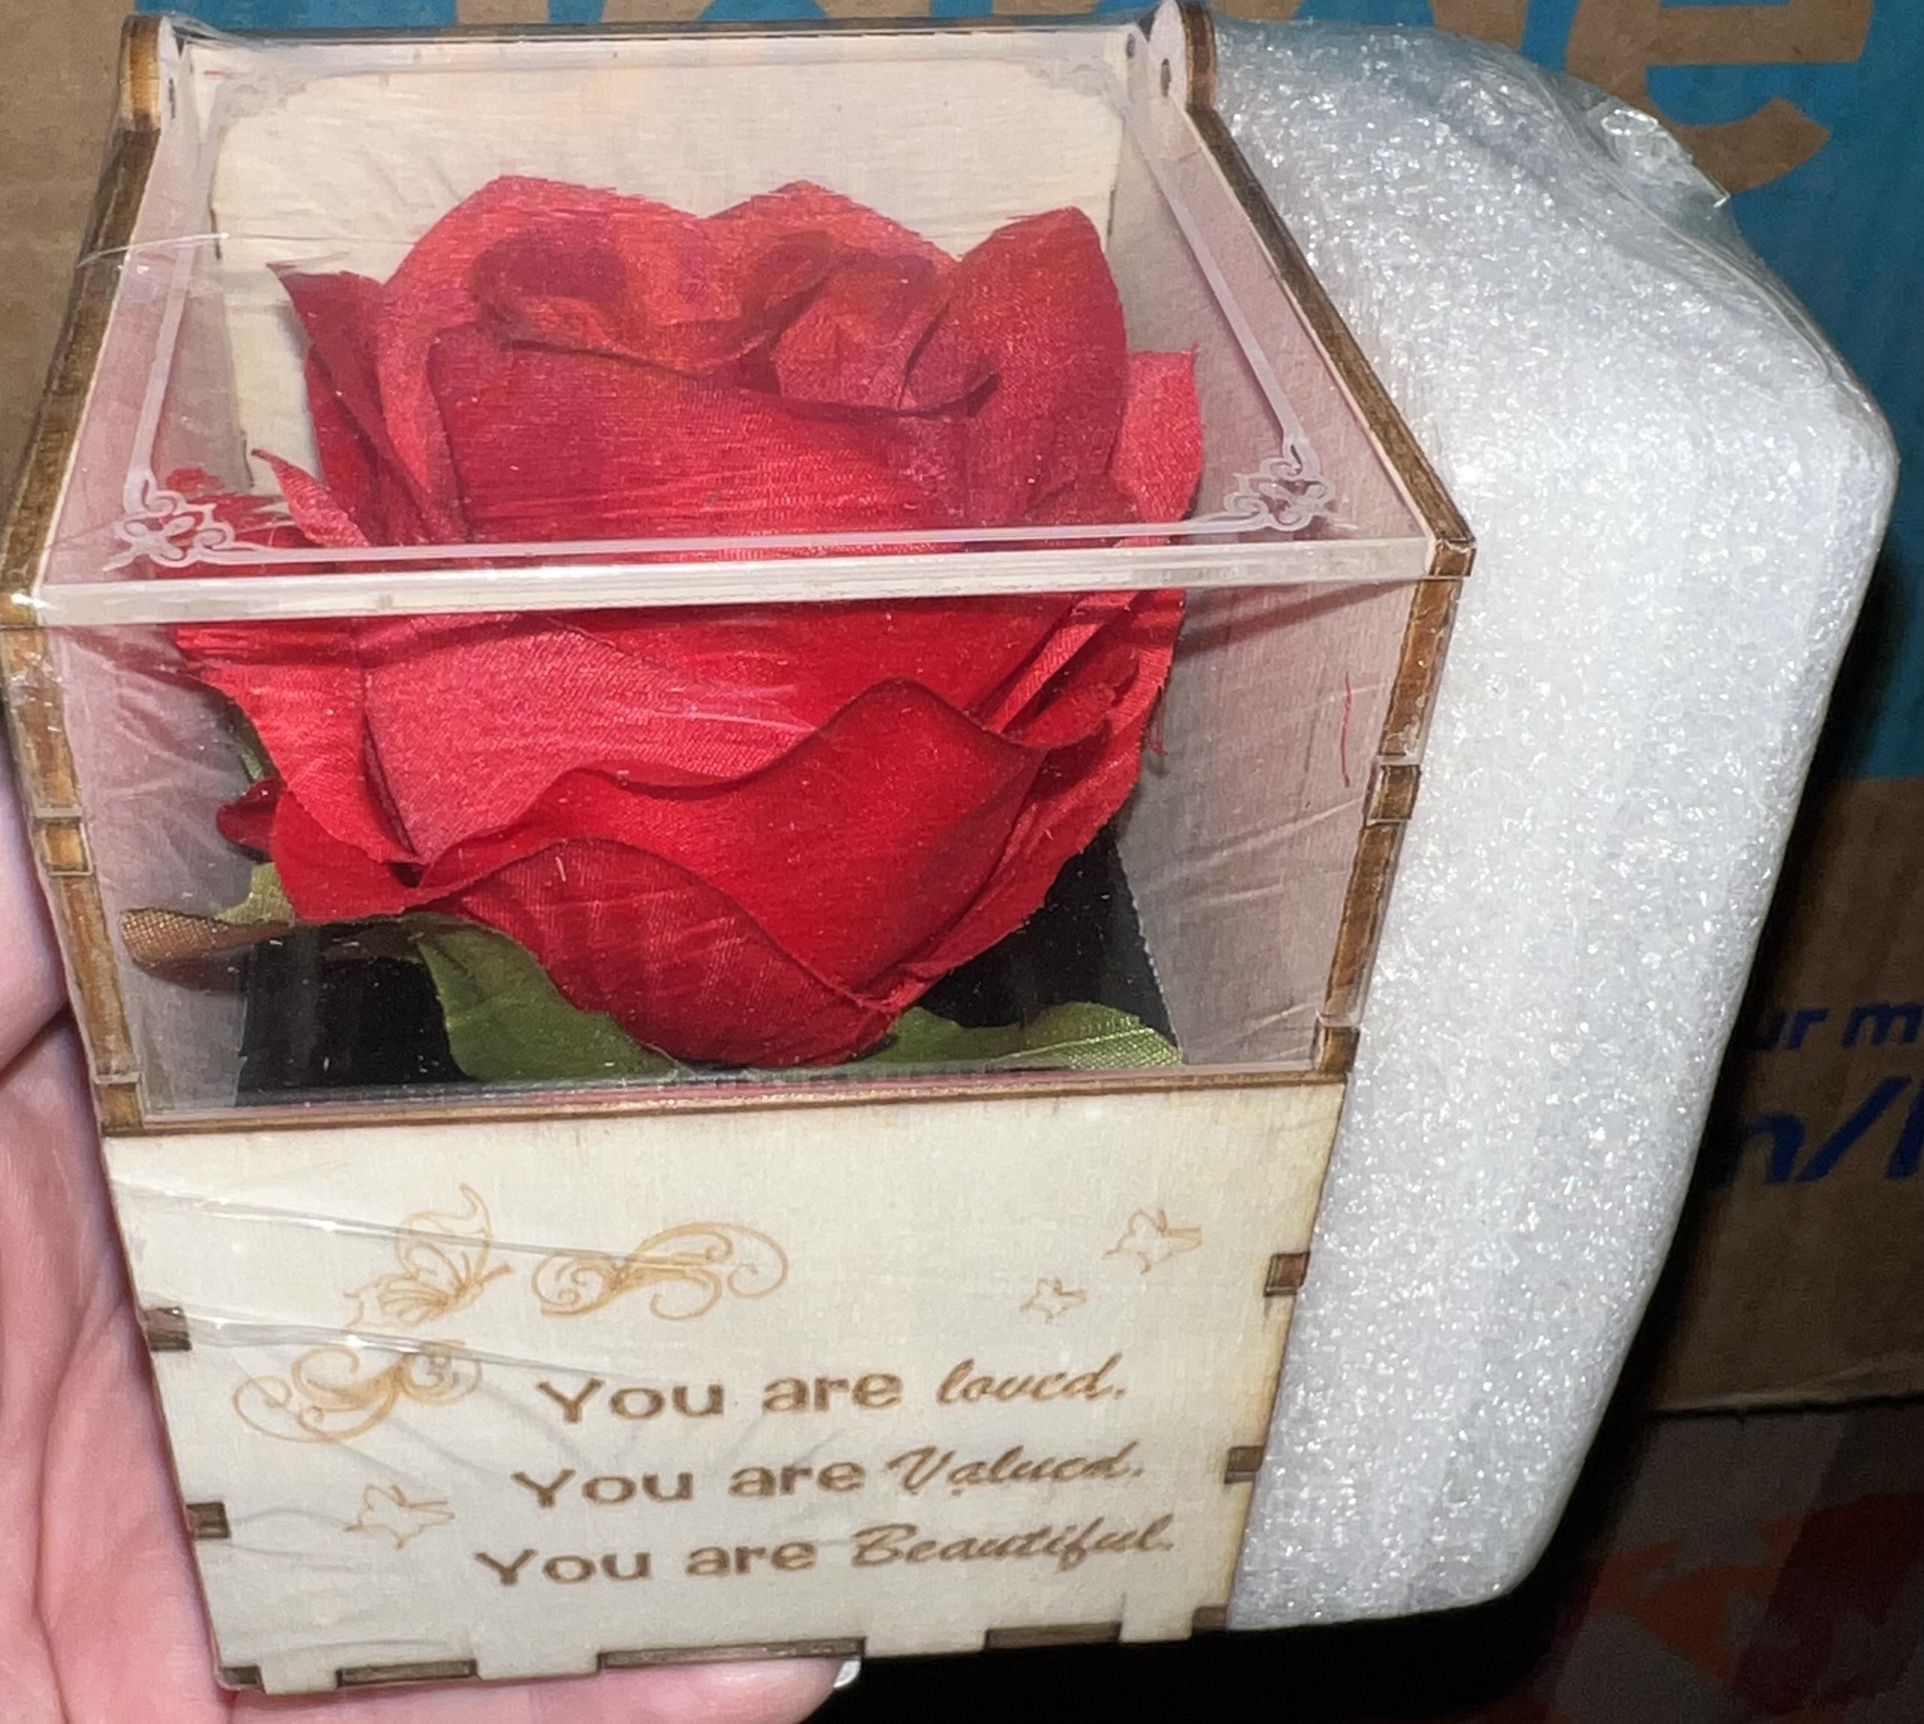 WIFTREY Music Box with Red Rose Gifts for Mom from Daughter Son, You are Loved you are valued you are beautiful Inspirational Gift for Mothers Day